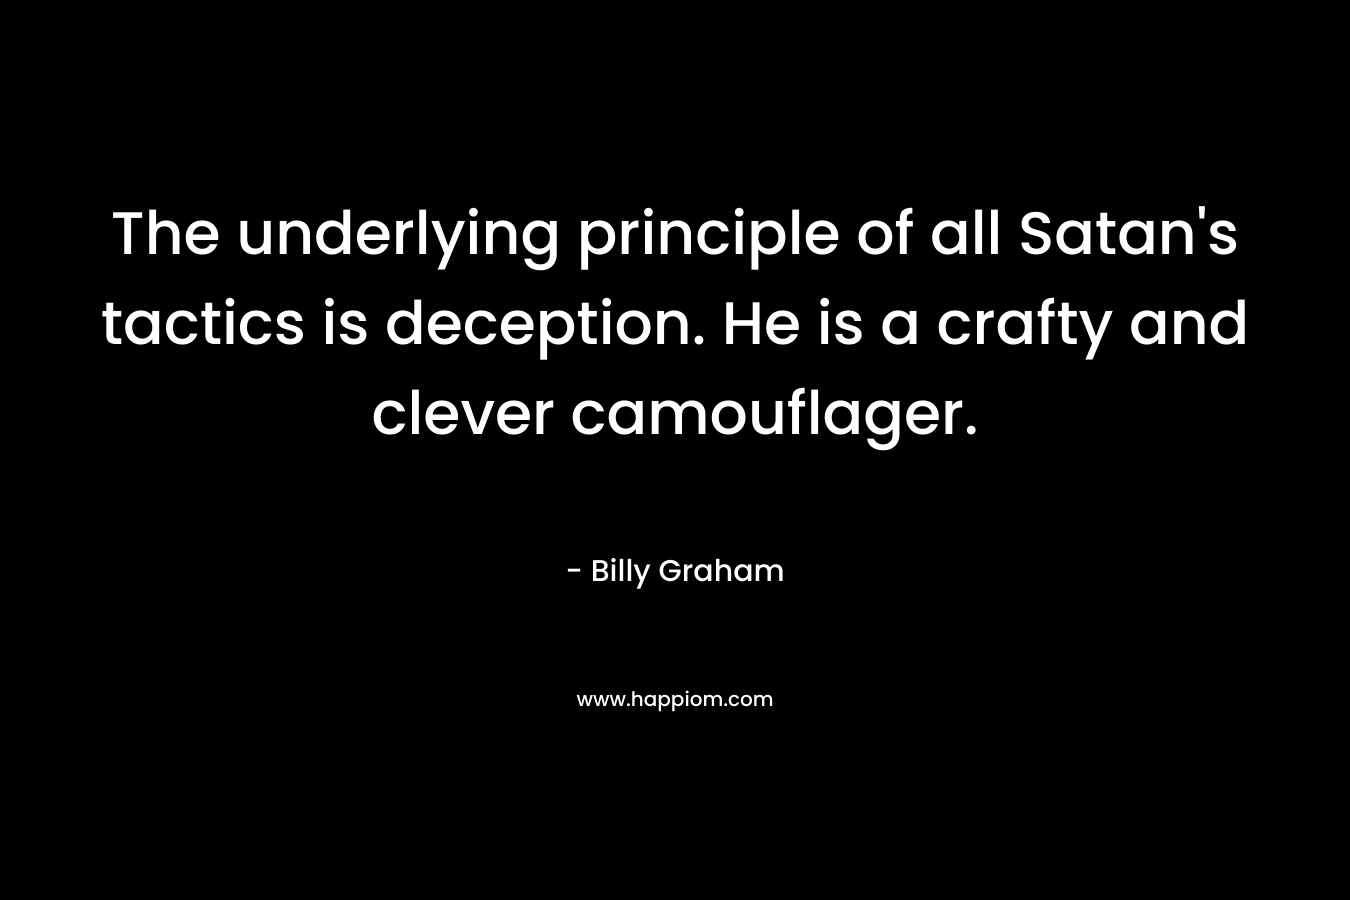 The underlying principle of all Satan’s tactics is deception. He is a crafty and clever camouflager. – Billy Graham